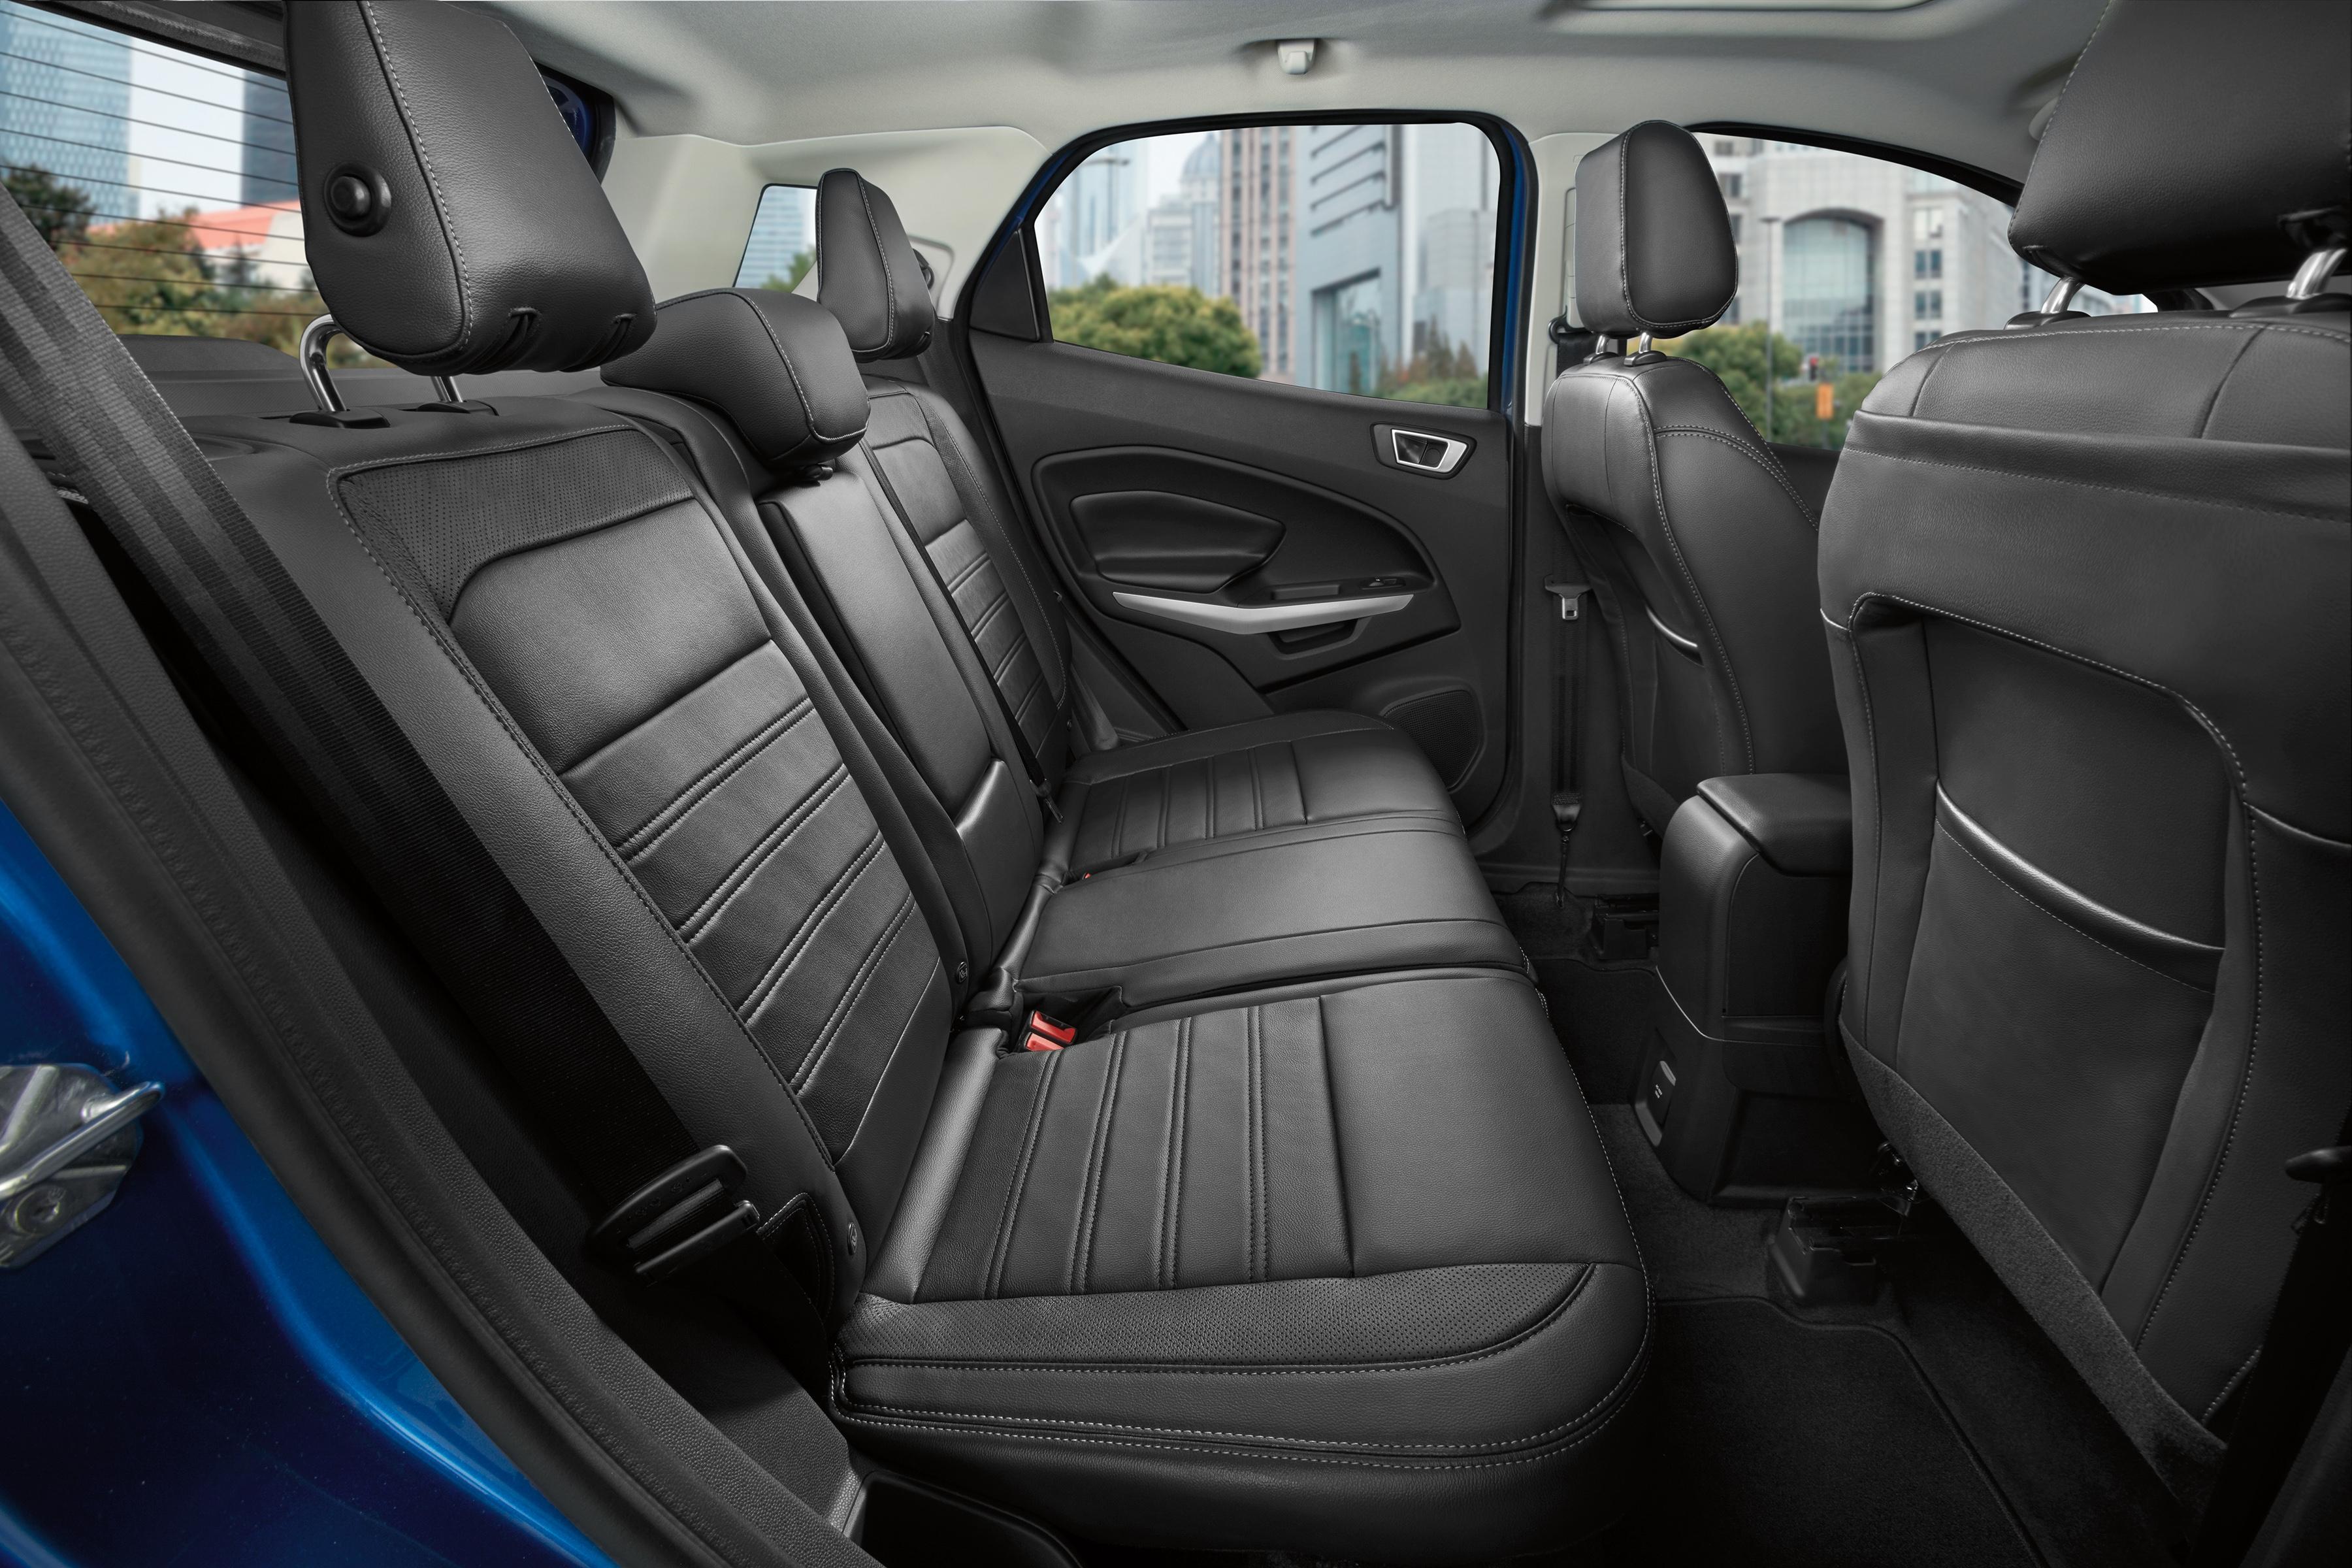 2021 Ford  Ecosport  interior  features SoCal Ford  Dealers